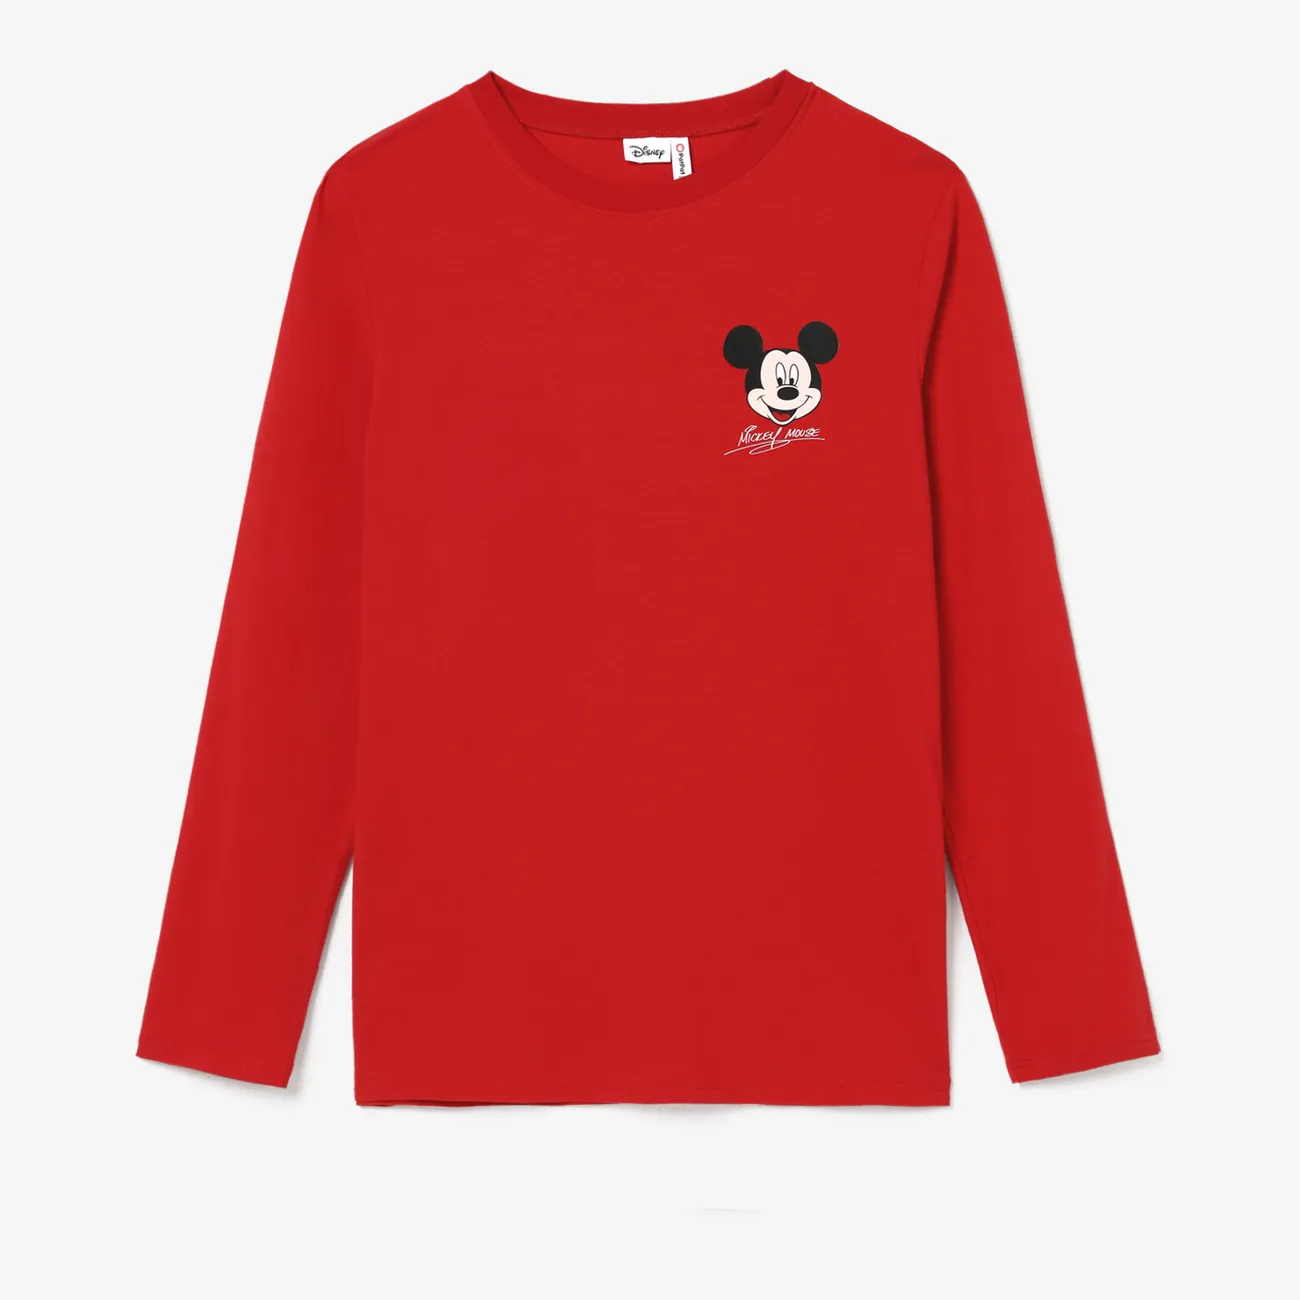 Disney Mickey and Friends Familien-Looks Langärmelig Familien-Outfits Sets rot big image 1